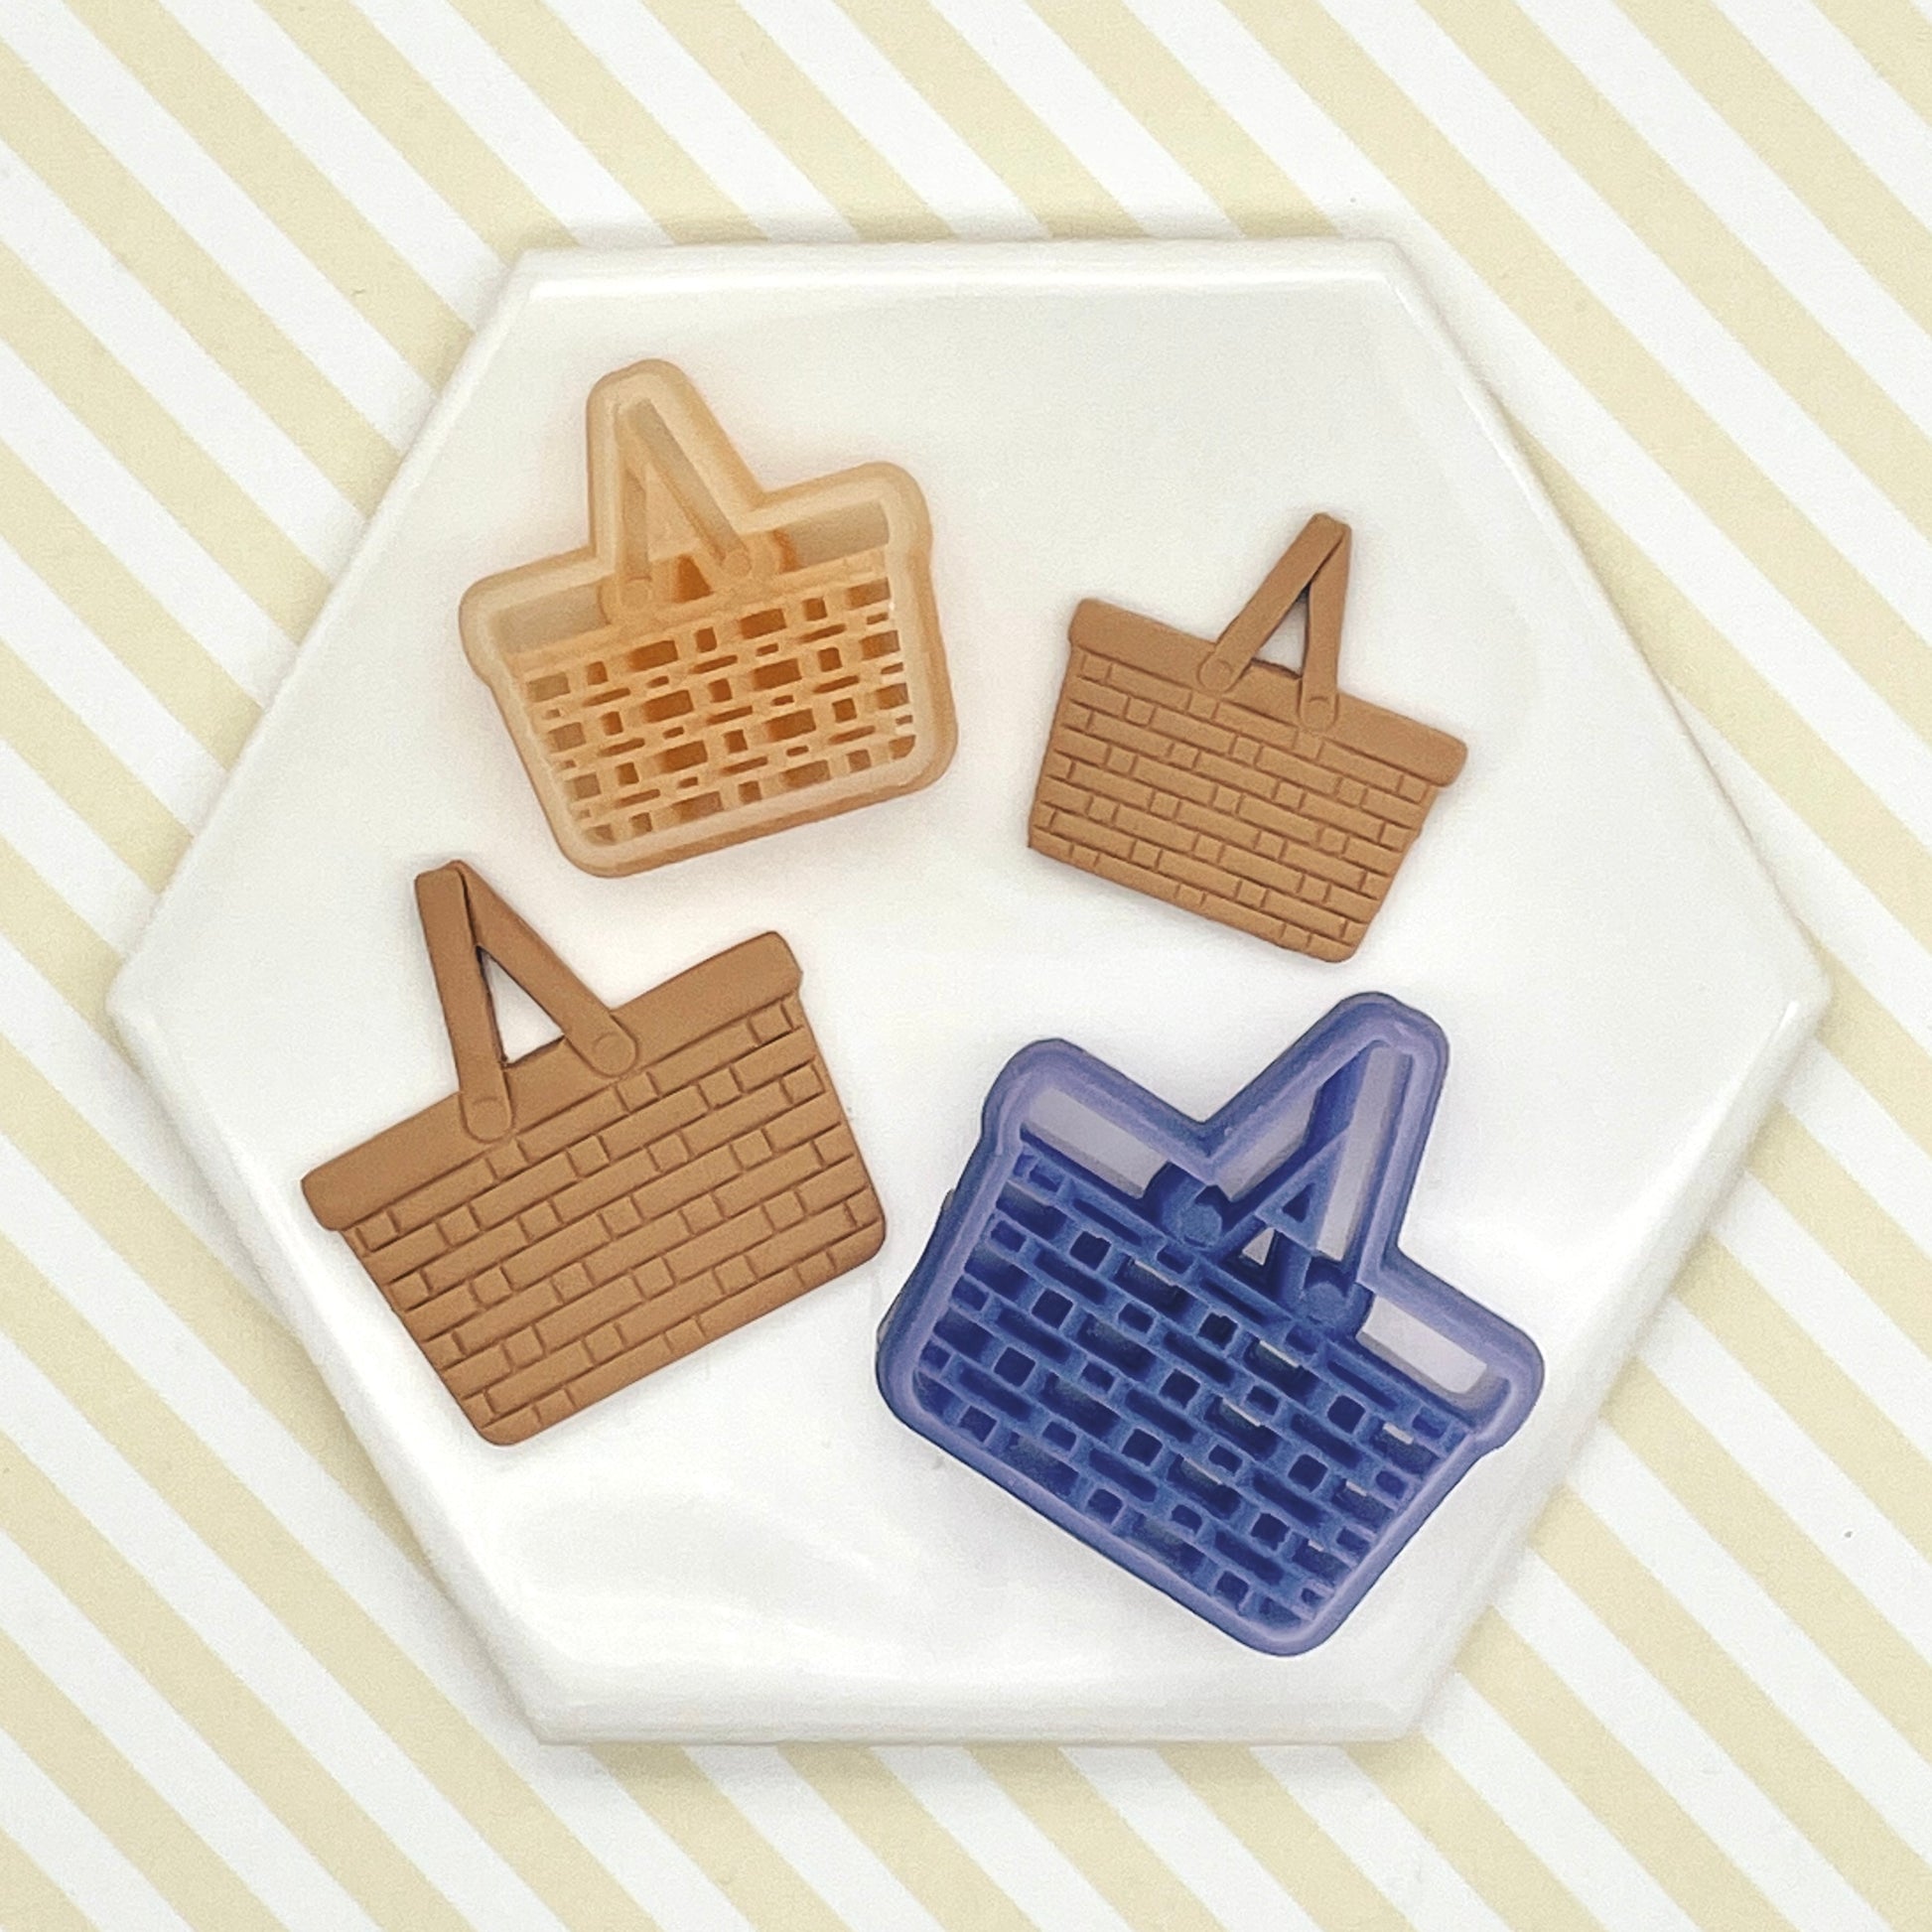 Picnic basket weave debossing polymer clay cutter